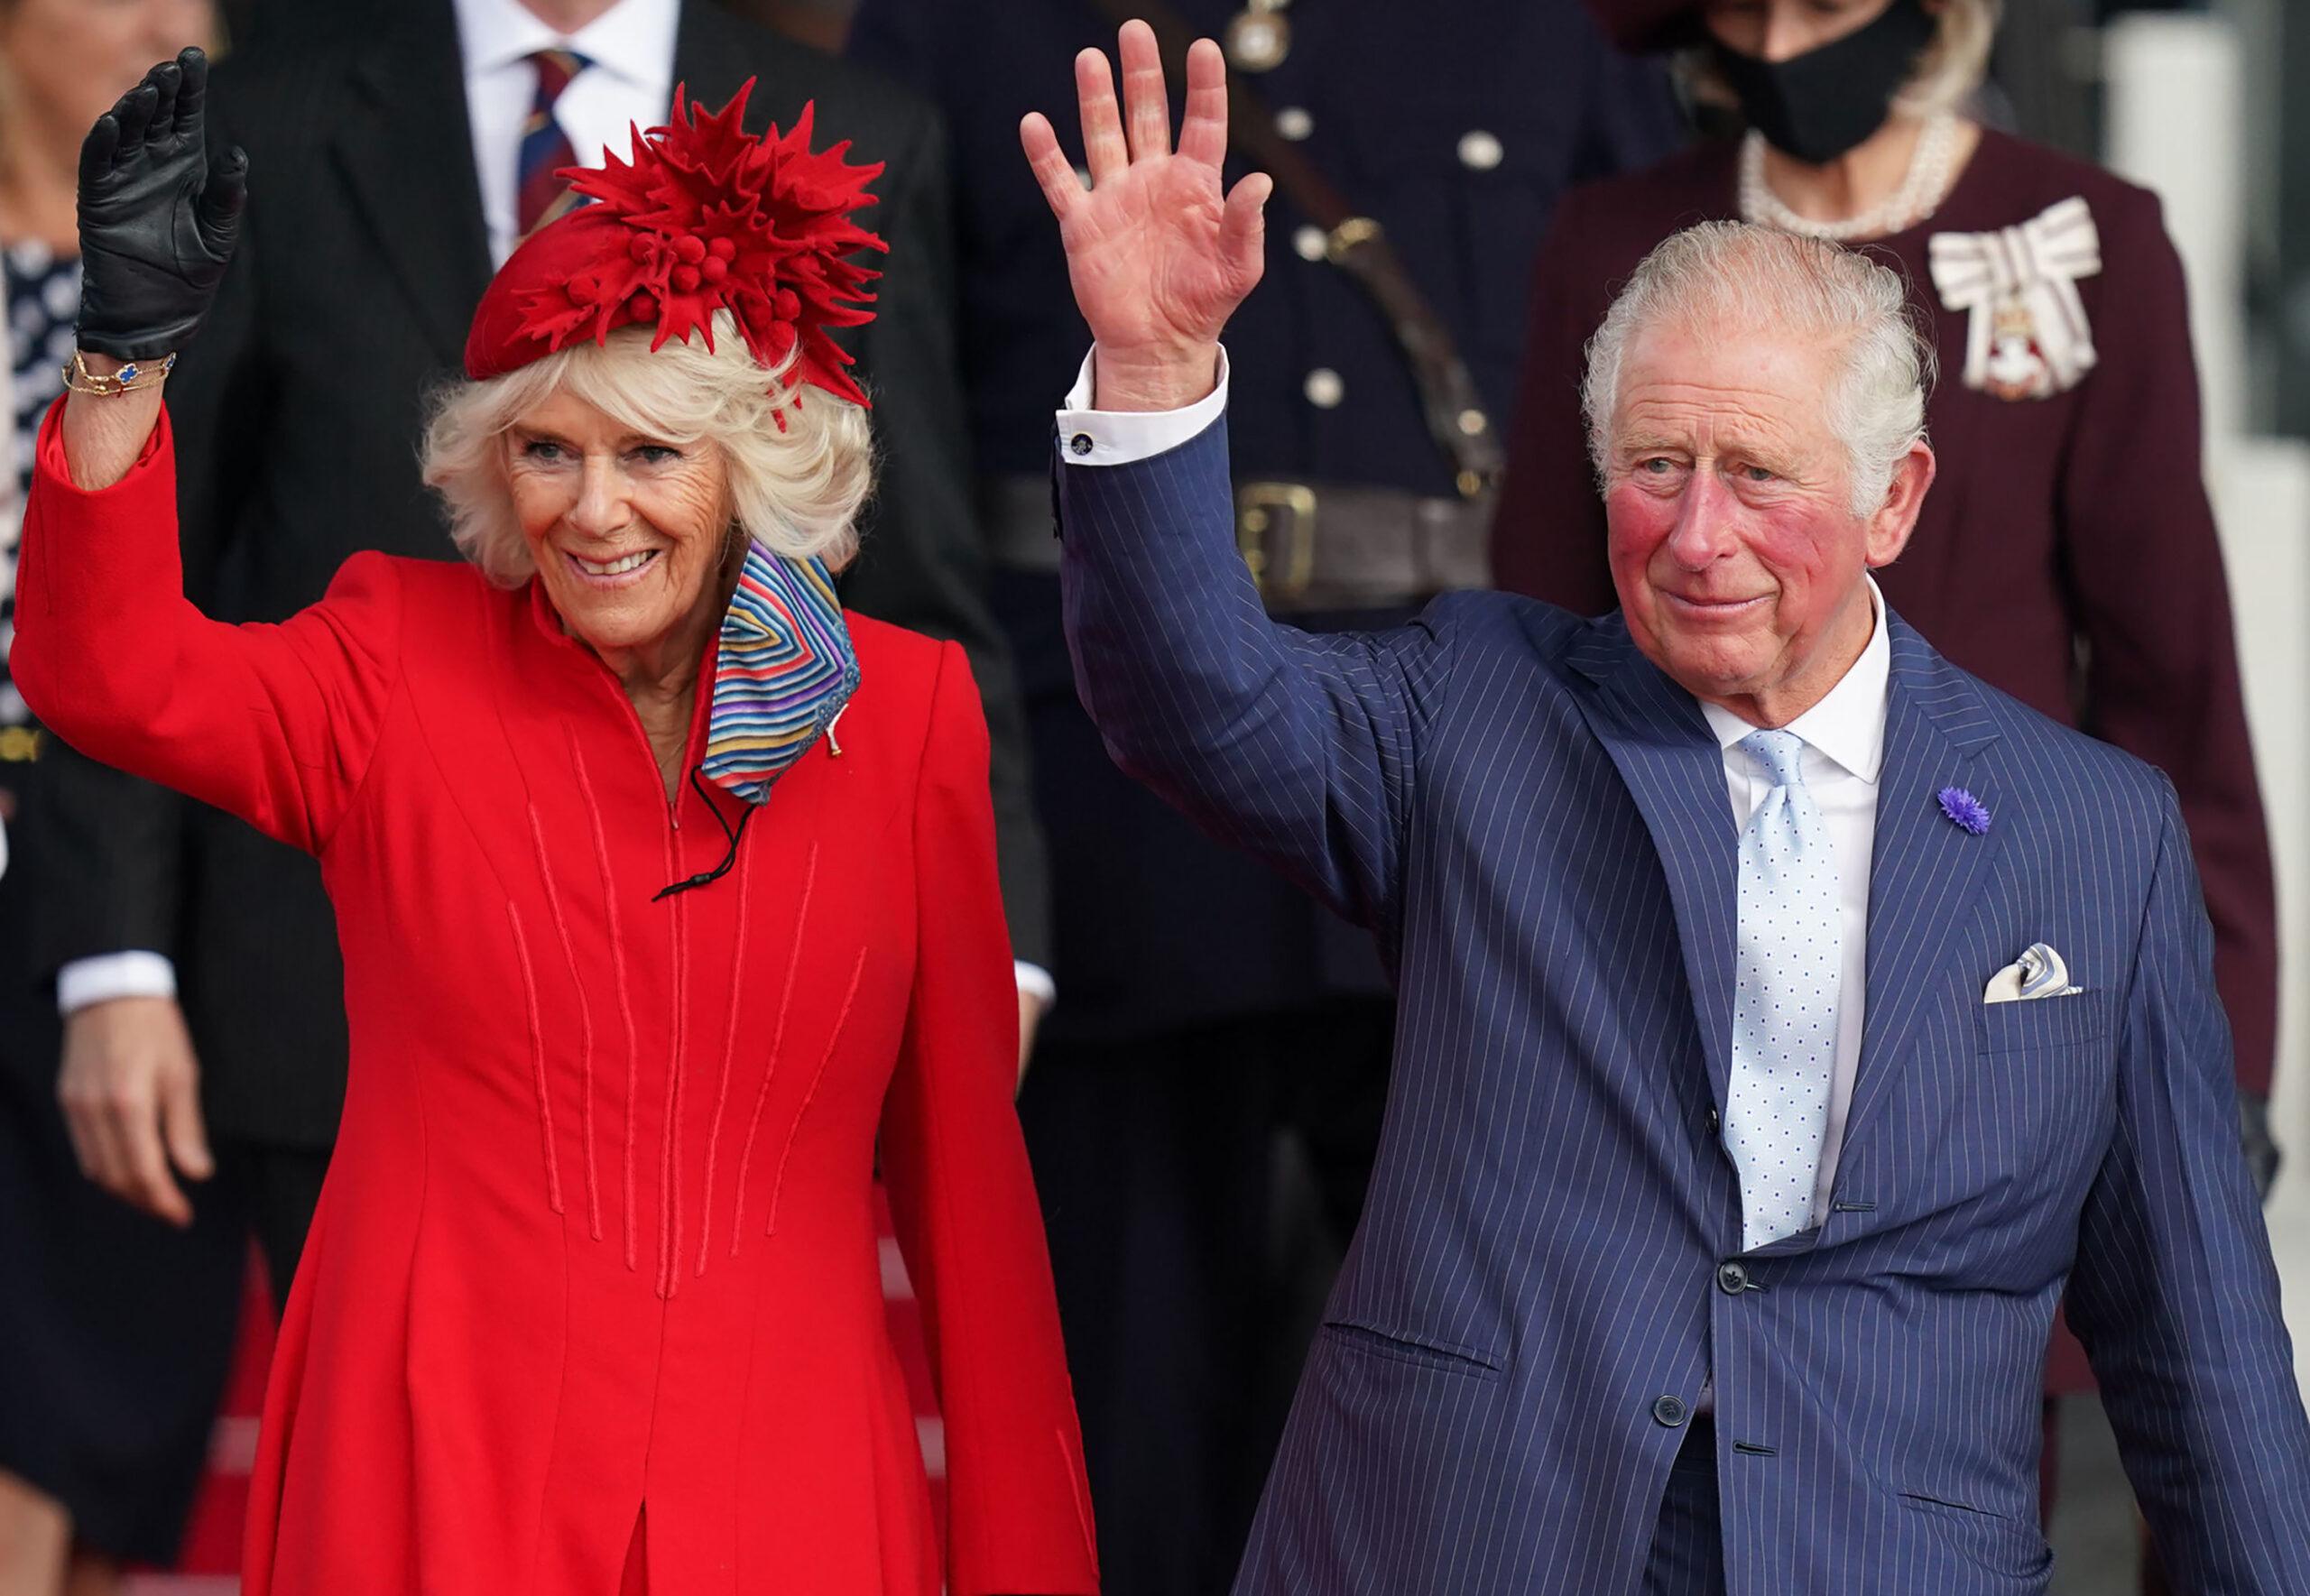 The Queen, The Prince of Wales, and The Duchess of Cornwall, attend the opening ceremony of the sixth session of the Senedd in Cardiff, UK, on the 14th October, 2021. Picture by Andrew Matthews/WPA-Pool. 14 Oct 2021 Pictured: Camilla, Duchess of Cornwall, Prince Charles, Prince of Wales, Queen, Queen Elizabeth II. Photo credit: MEGA TheMegaAgency.com +1 888 505 6342 (Mega Agency TagID: MEGA796315_001.jpg) [Photo via Mega Agency]